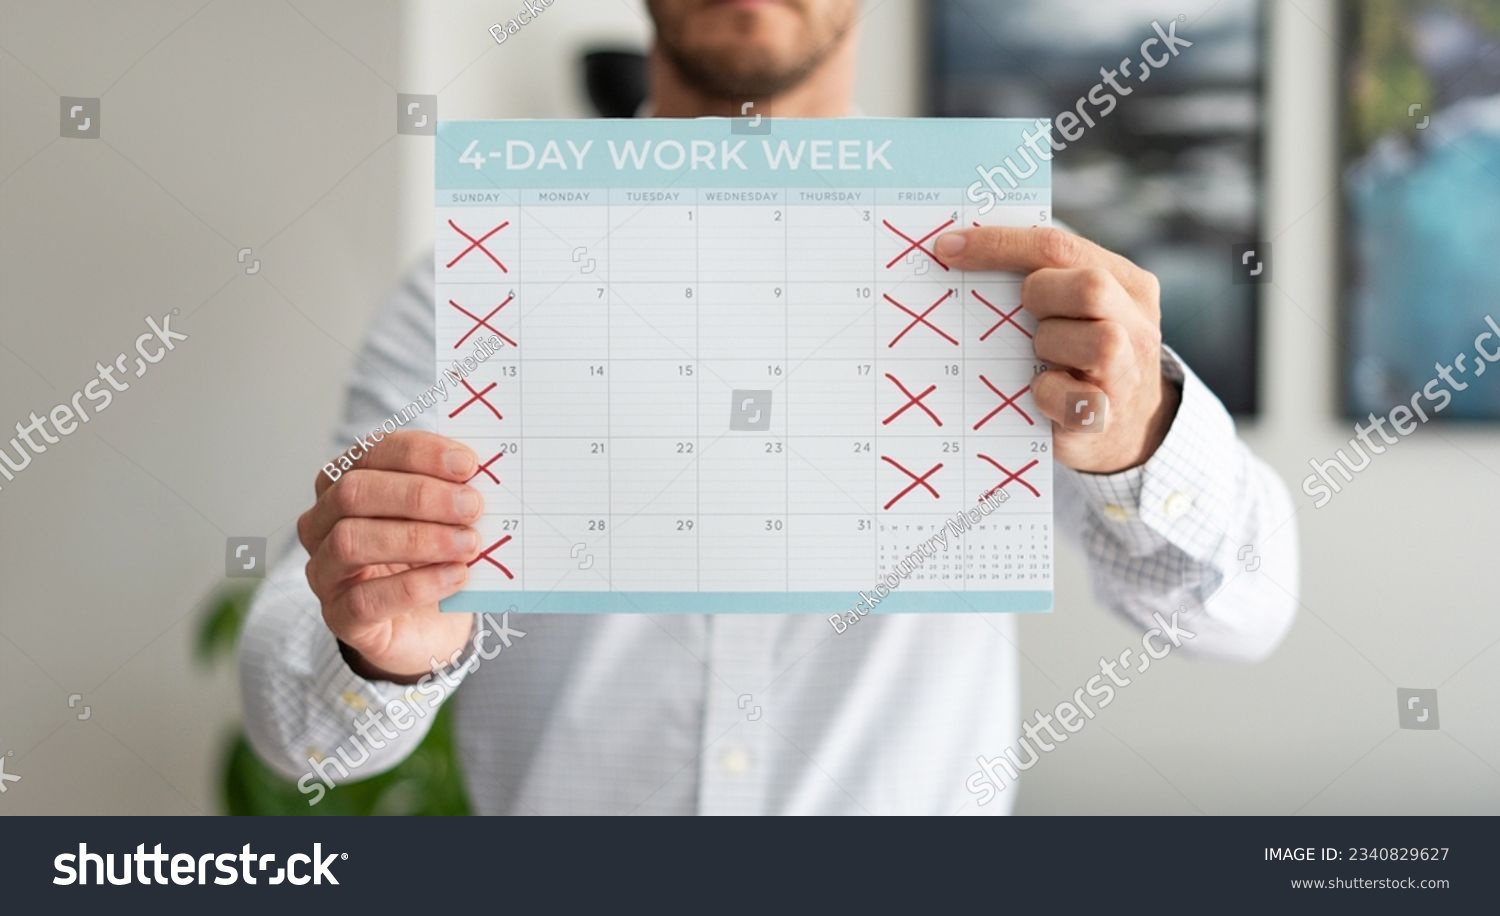 Man holding a calendar pointing to a 4-day work week concept #2340829627